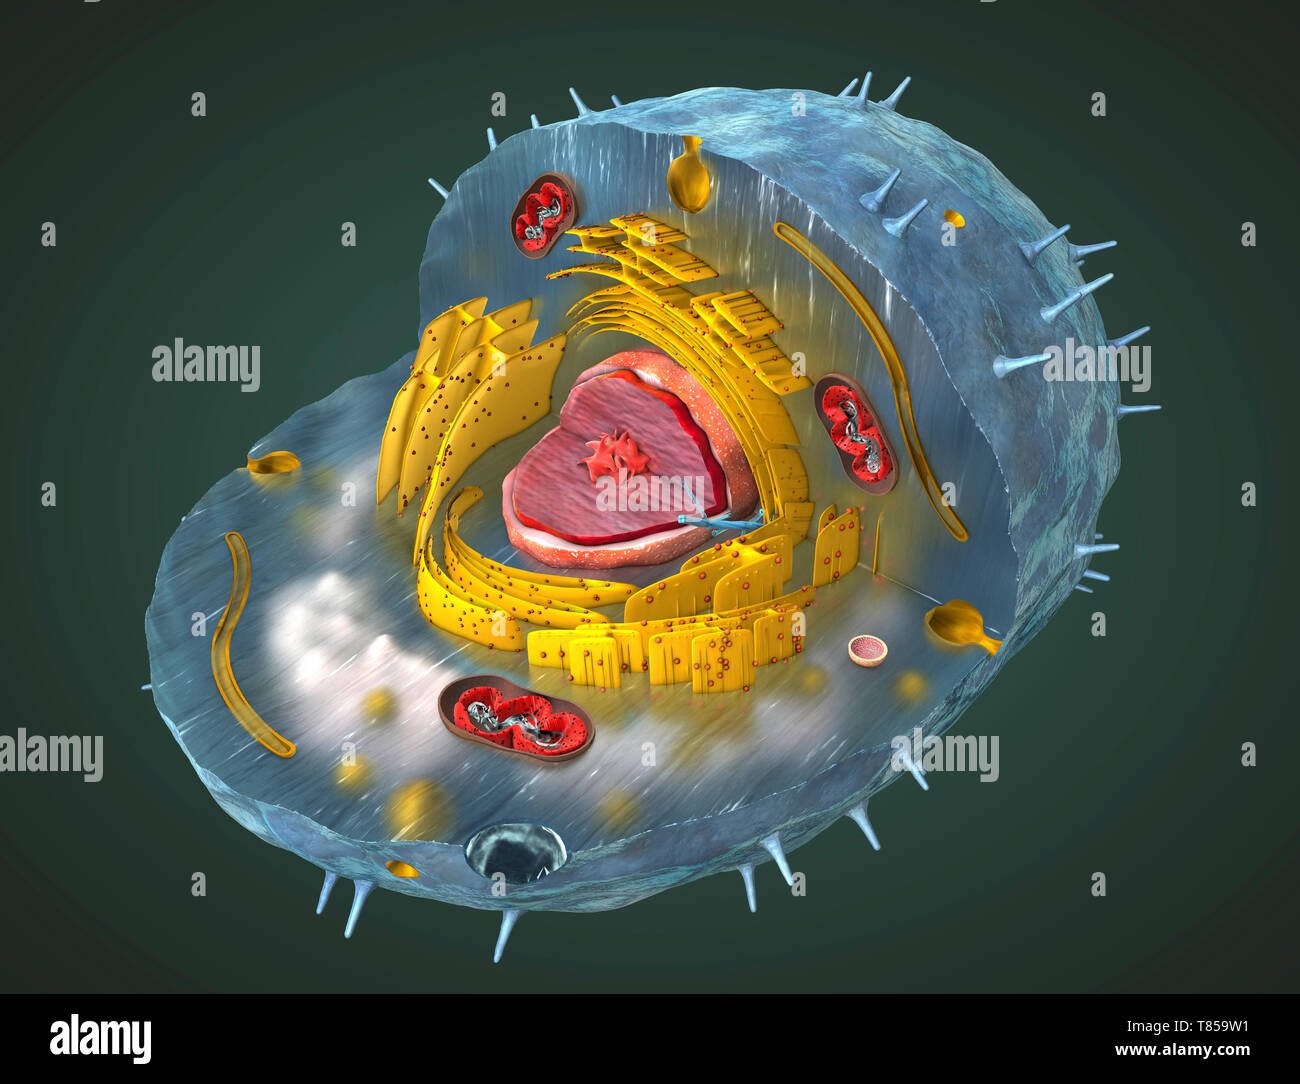 Animal Cell Hd Picture Animal Cell Hd Stock Images Shutterstock 4k